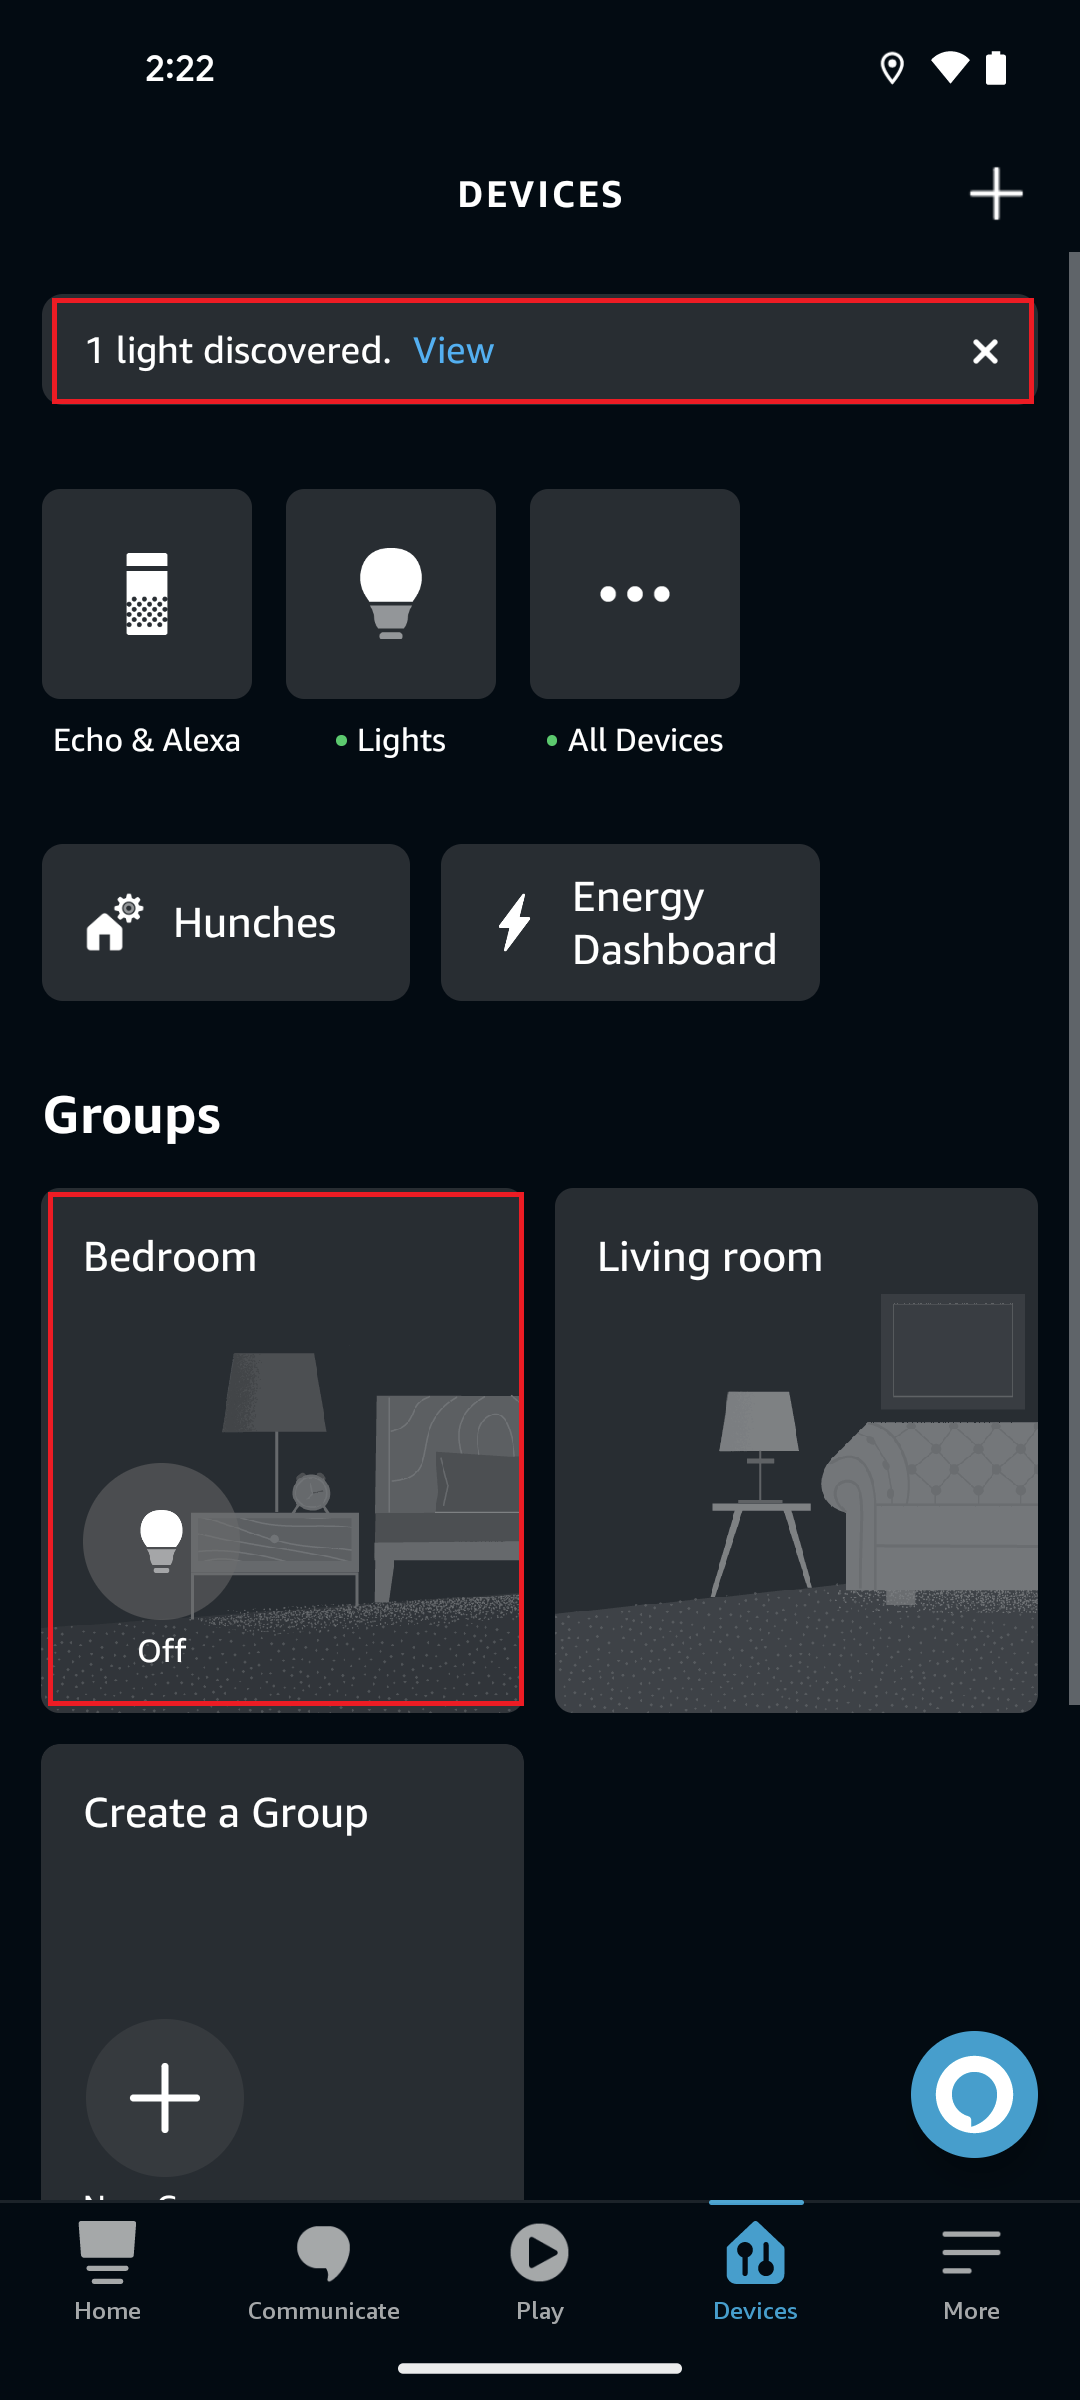 Alexa application added to group